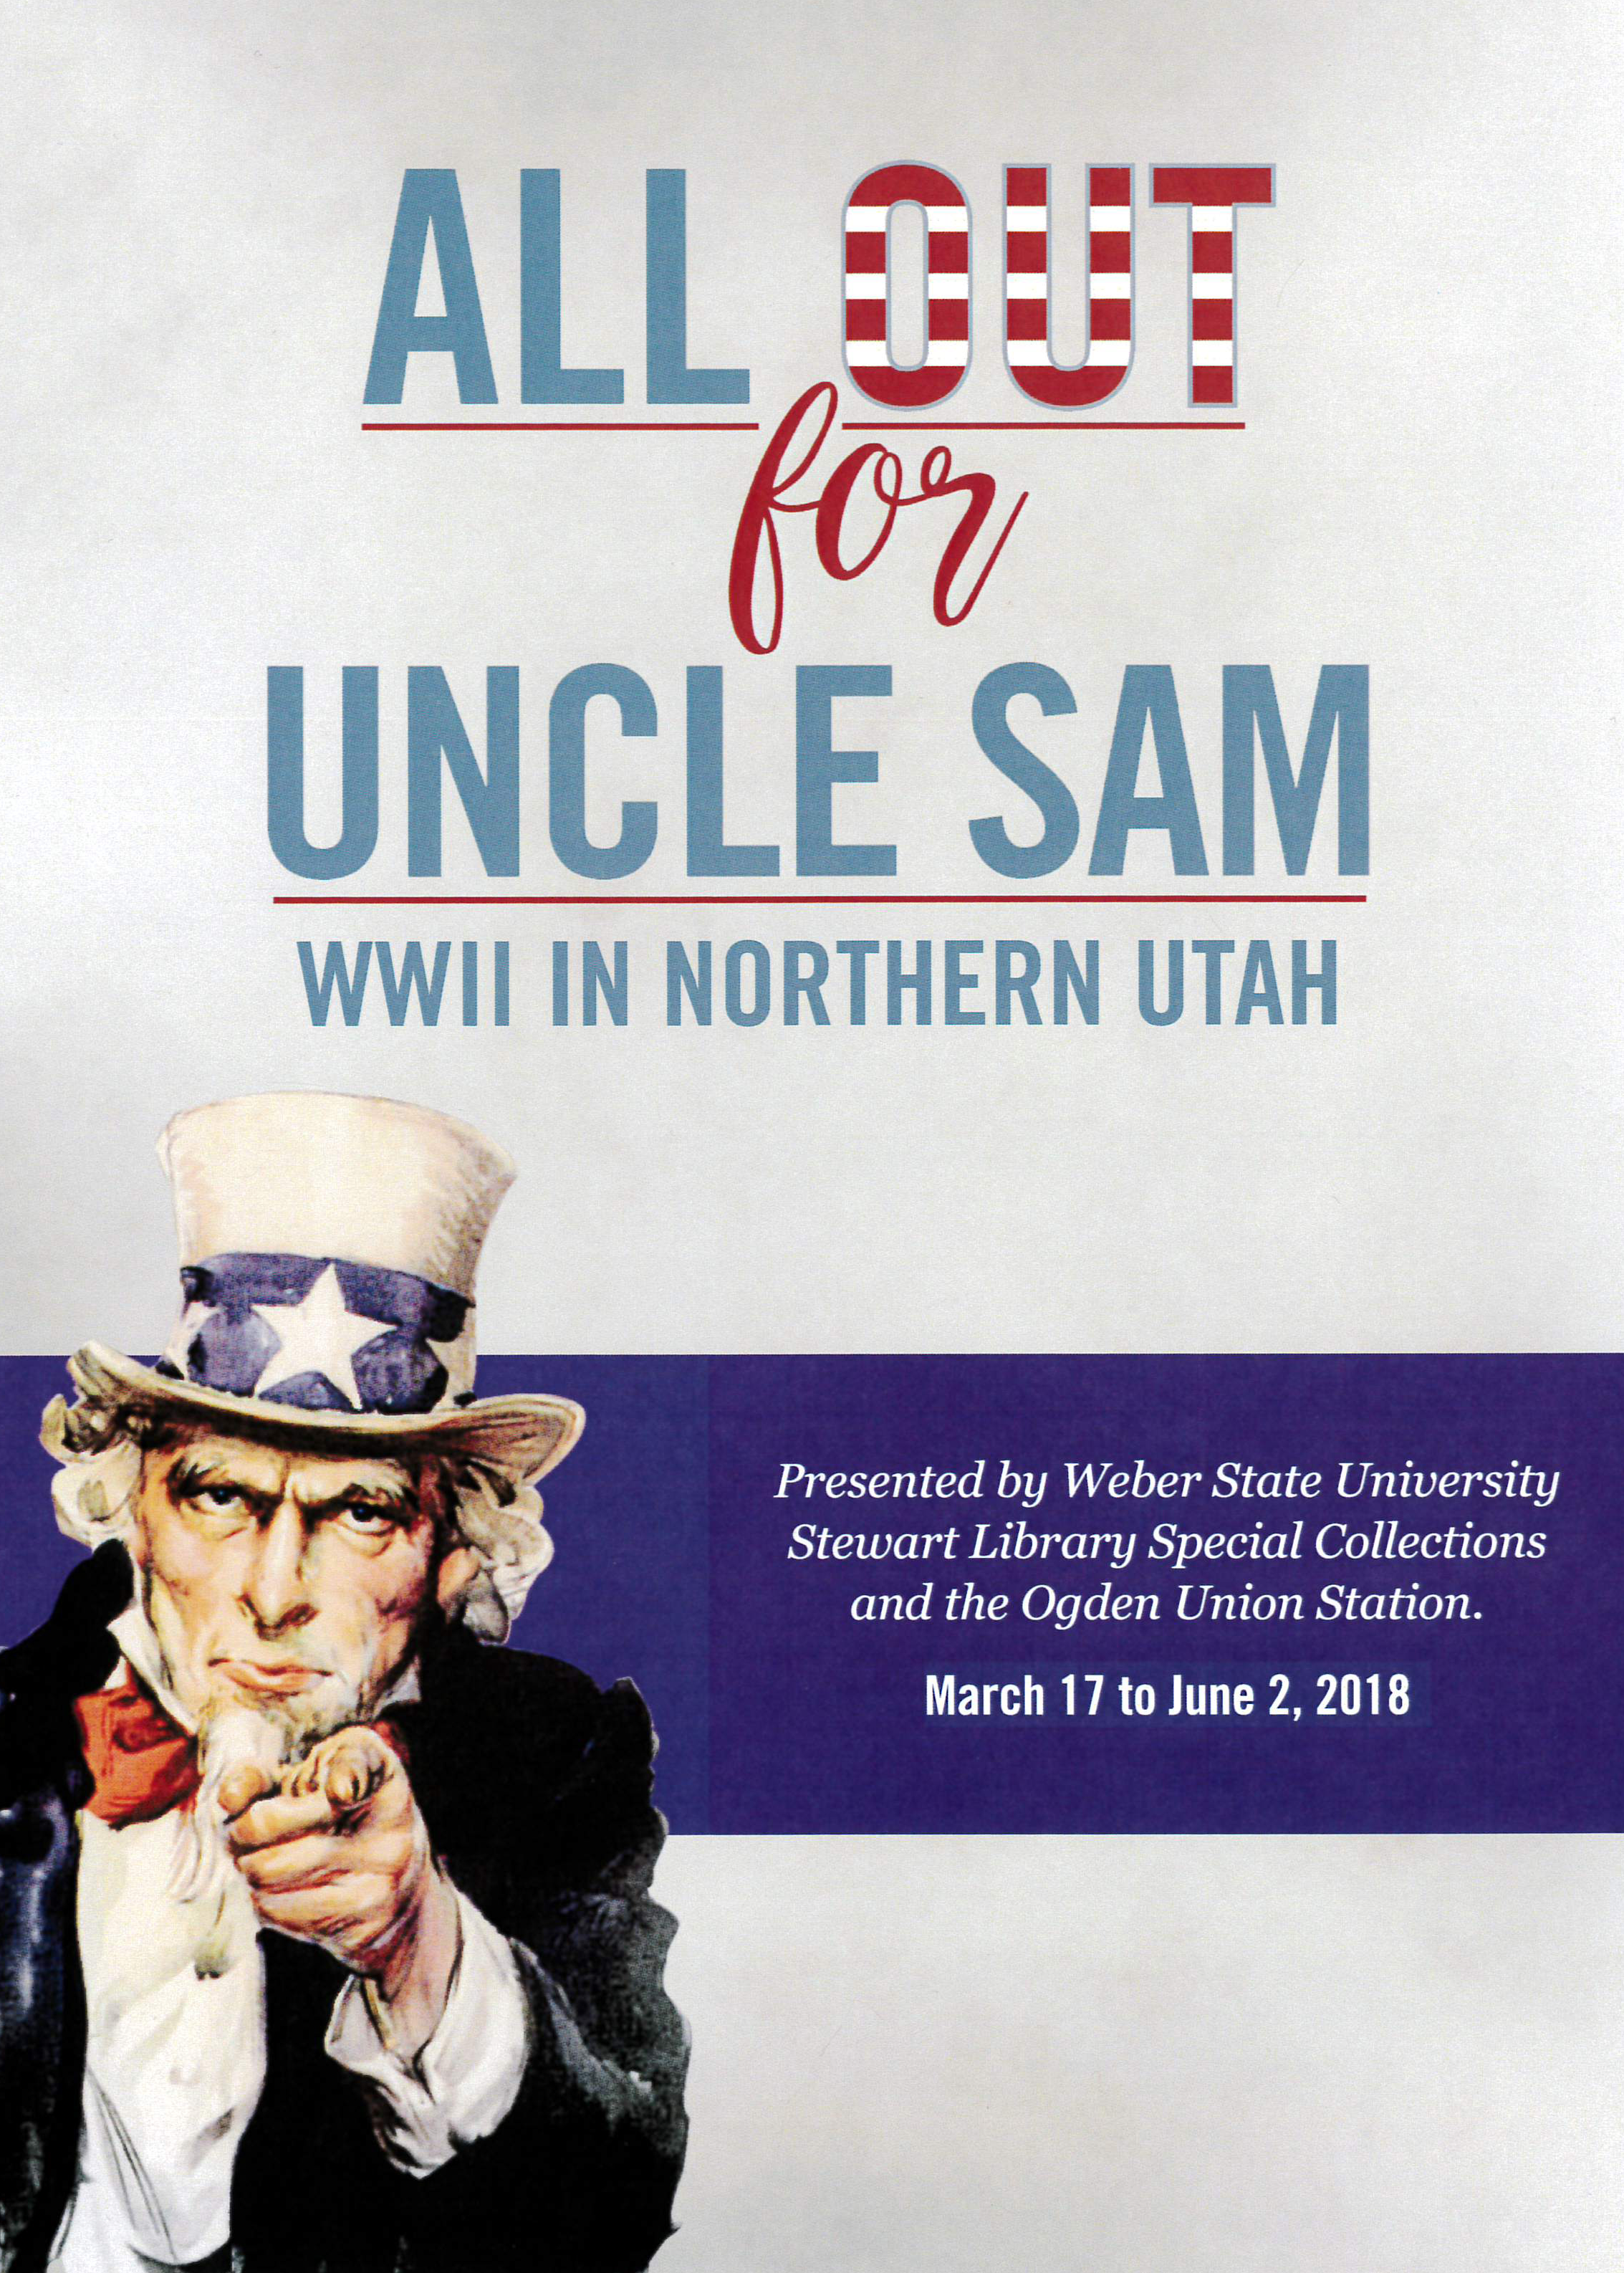 Image of Uncle Sam with details about the exhibit